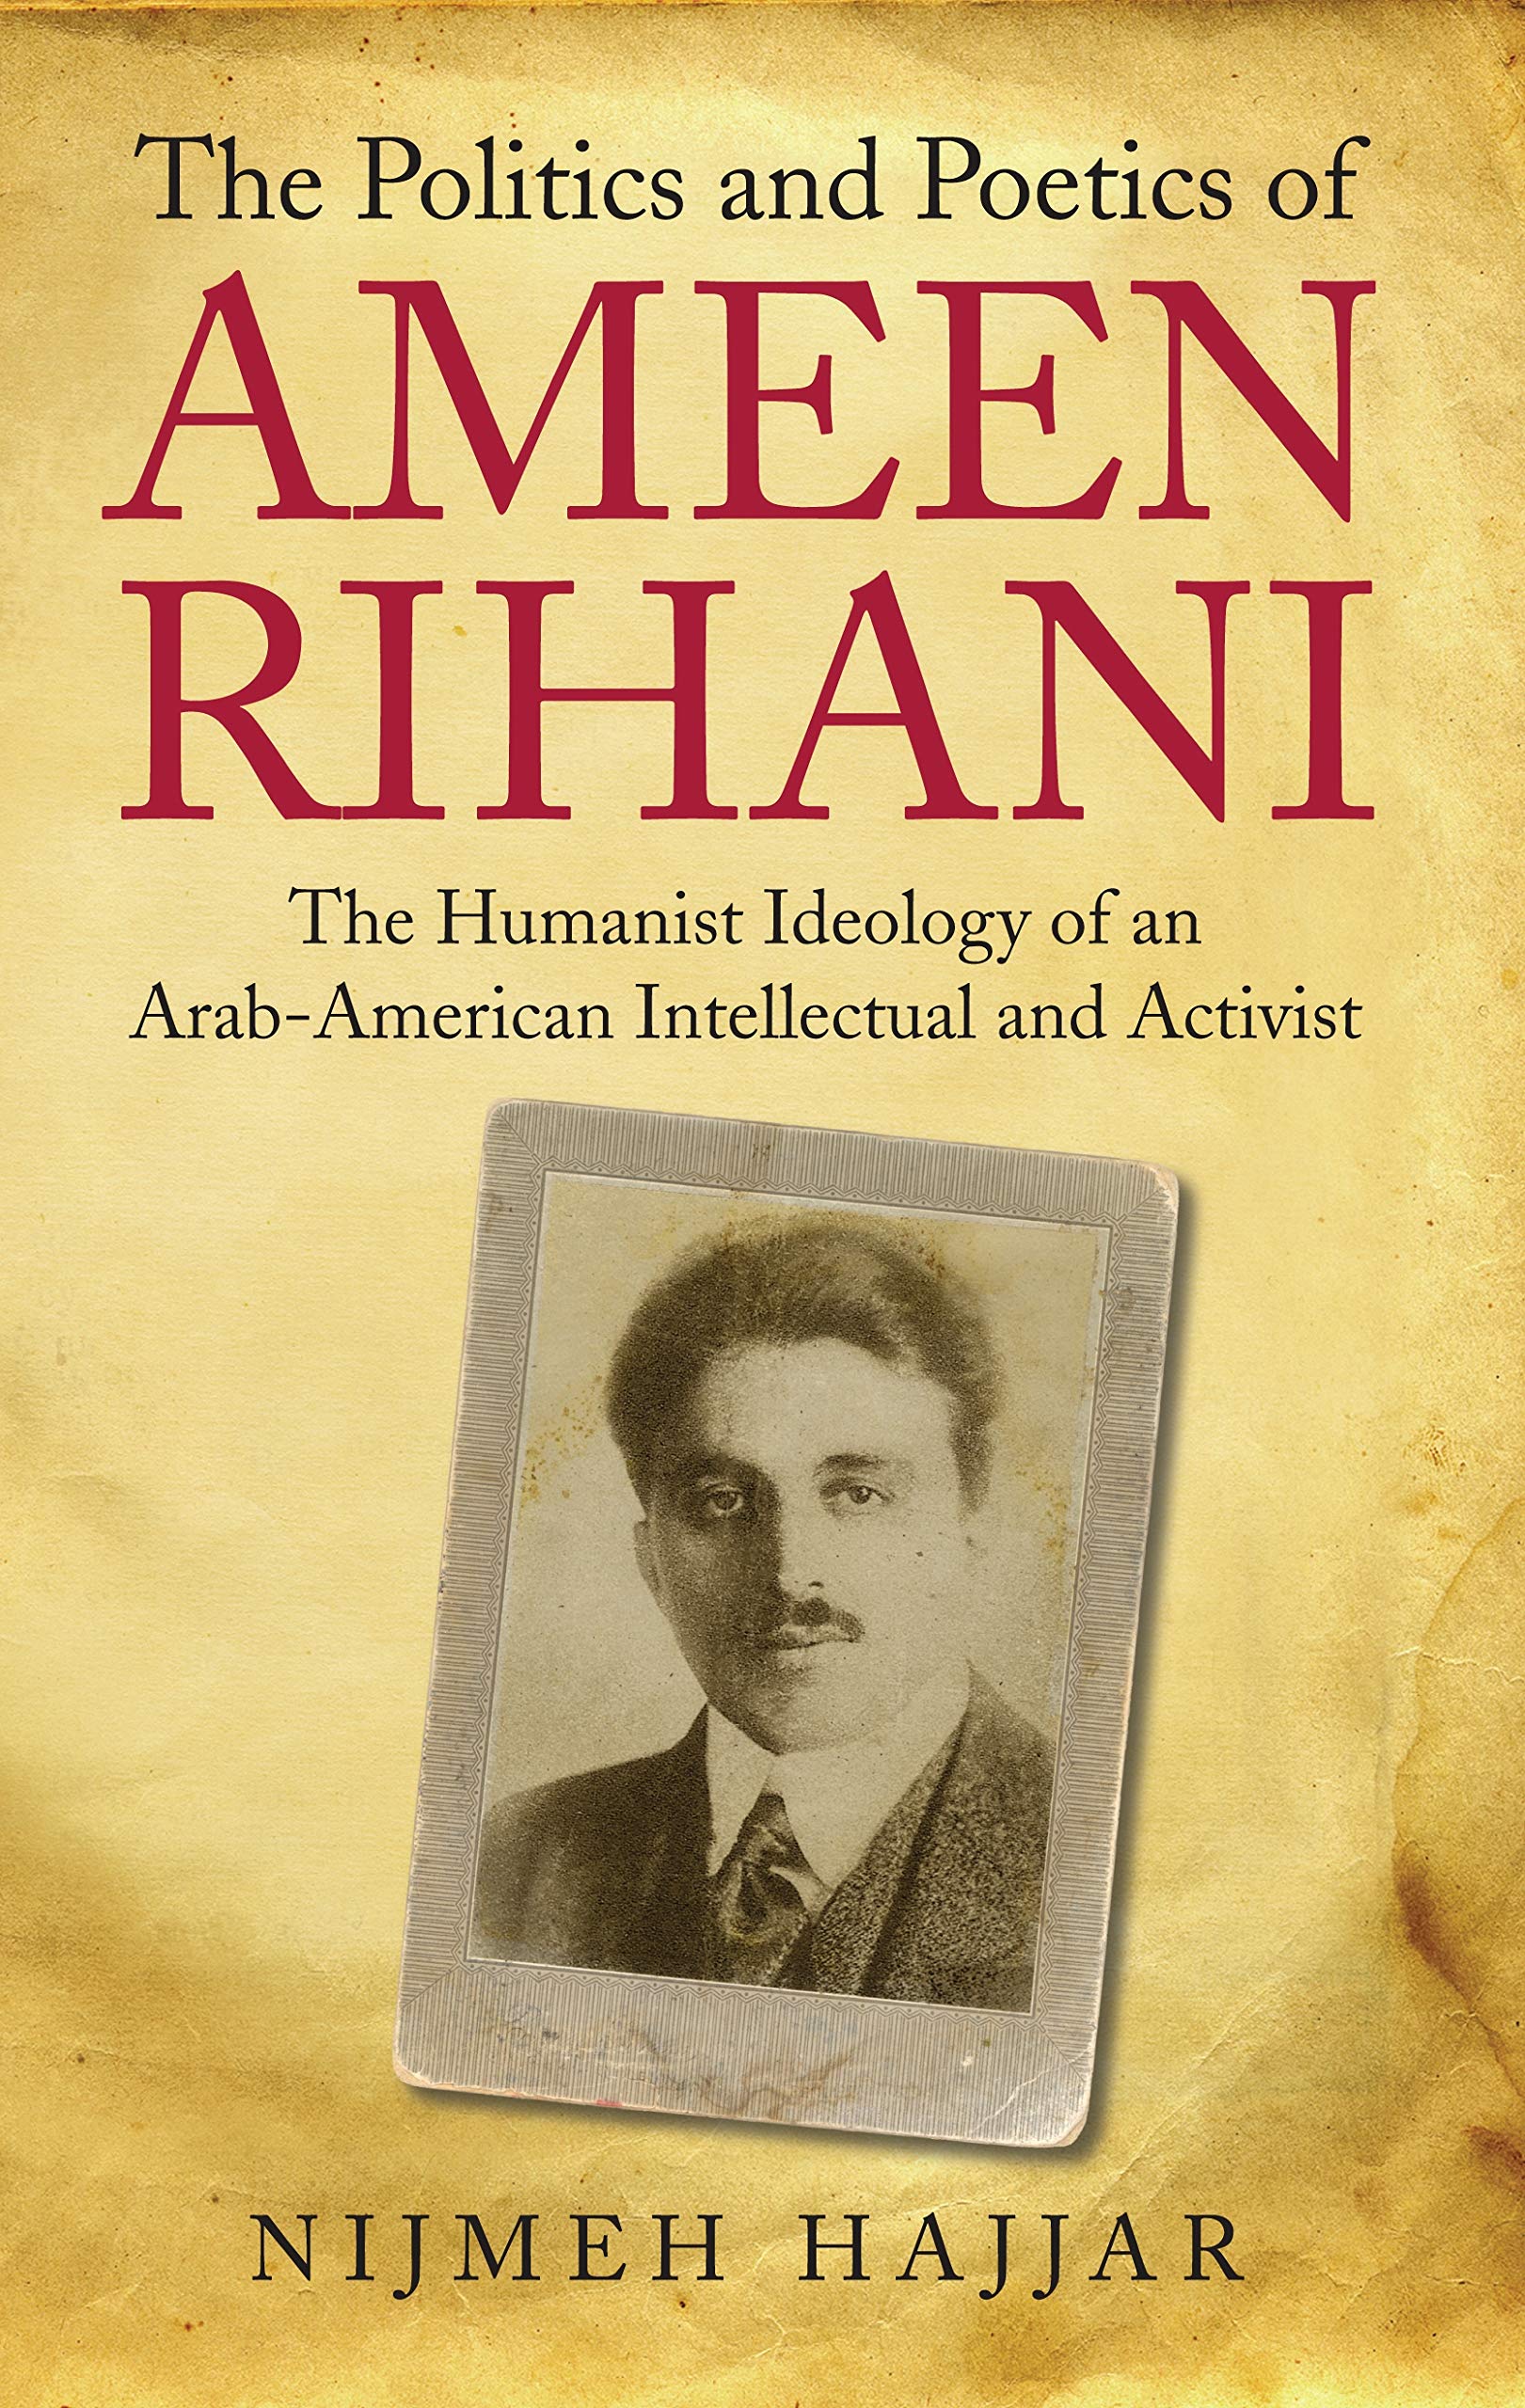 The Politics and Poetics of Ameen Rihani: The Humanist Ideology of an Arab-American Intellectual and Activist (Library of Modern Middle East Studies) 